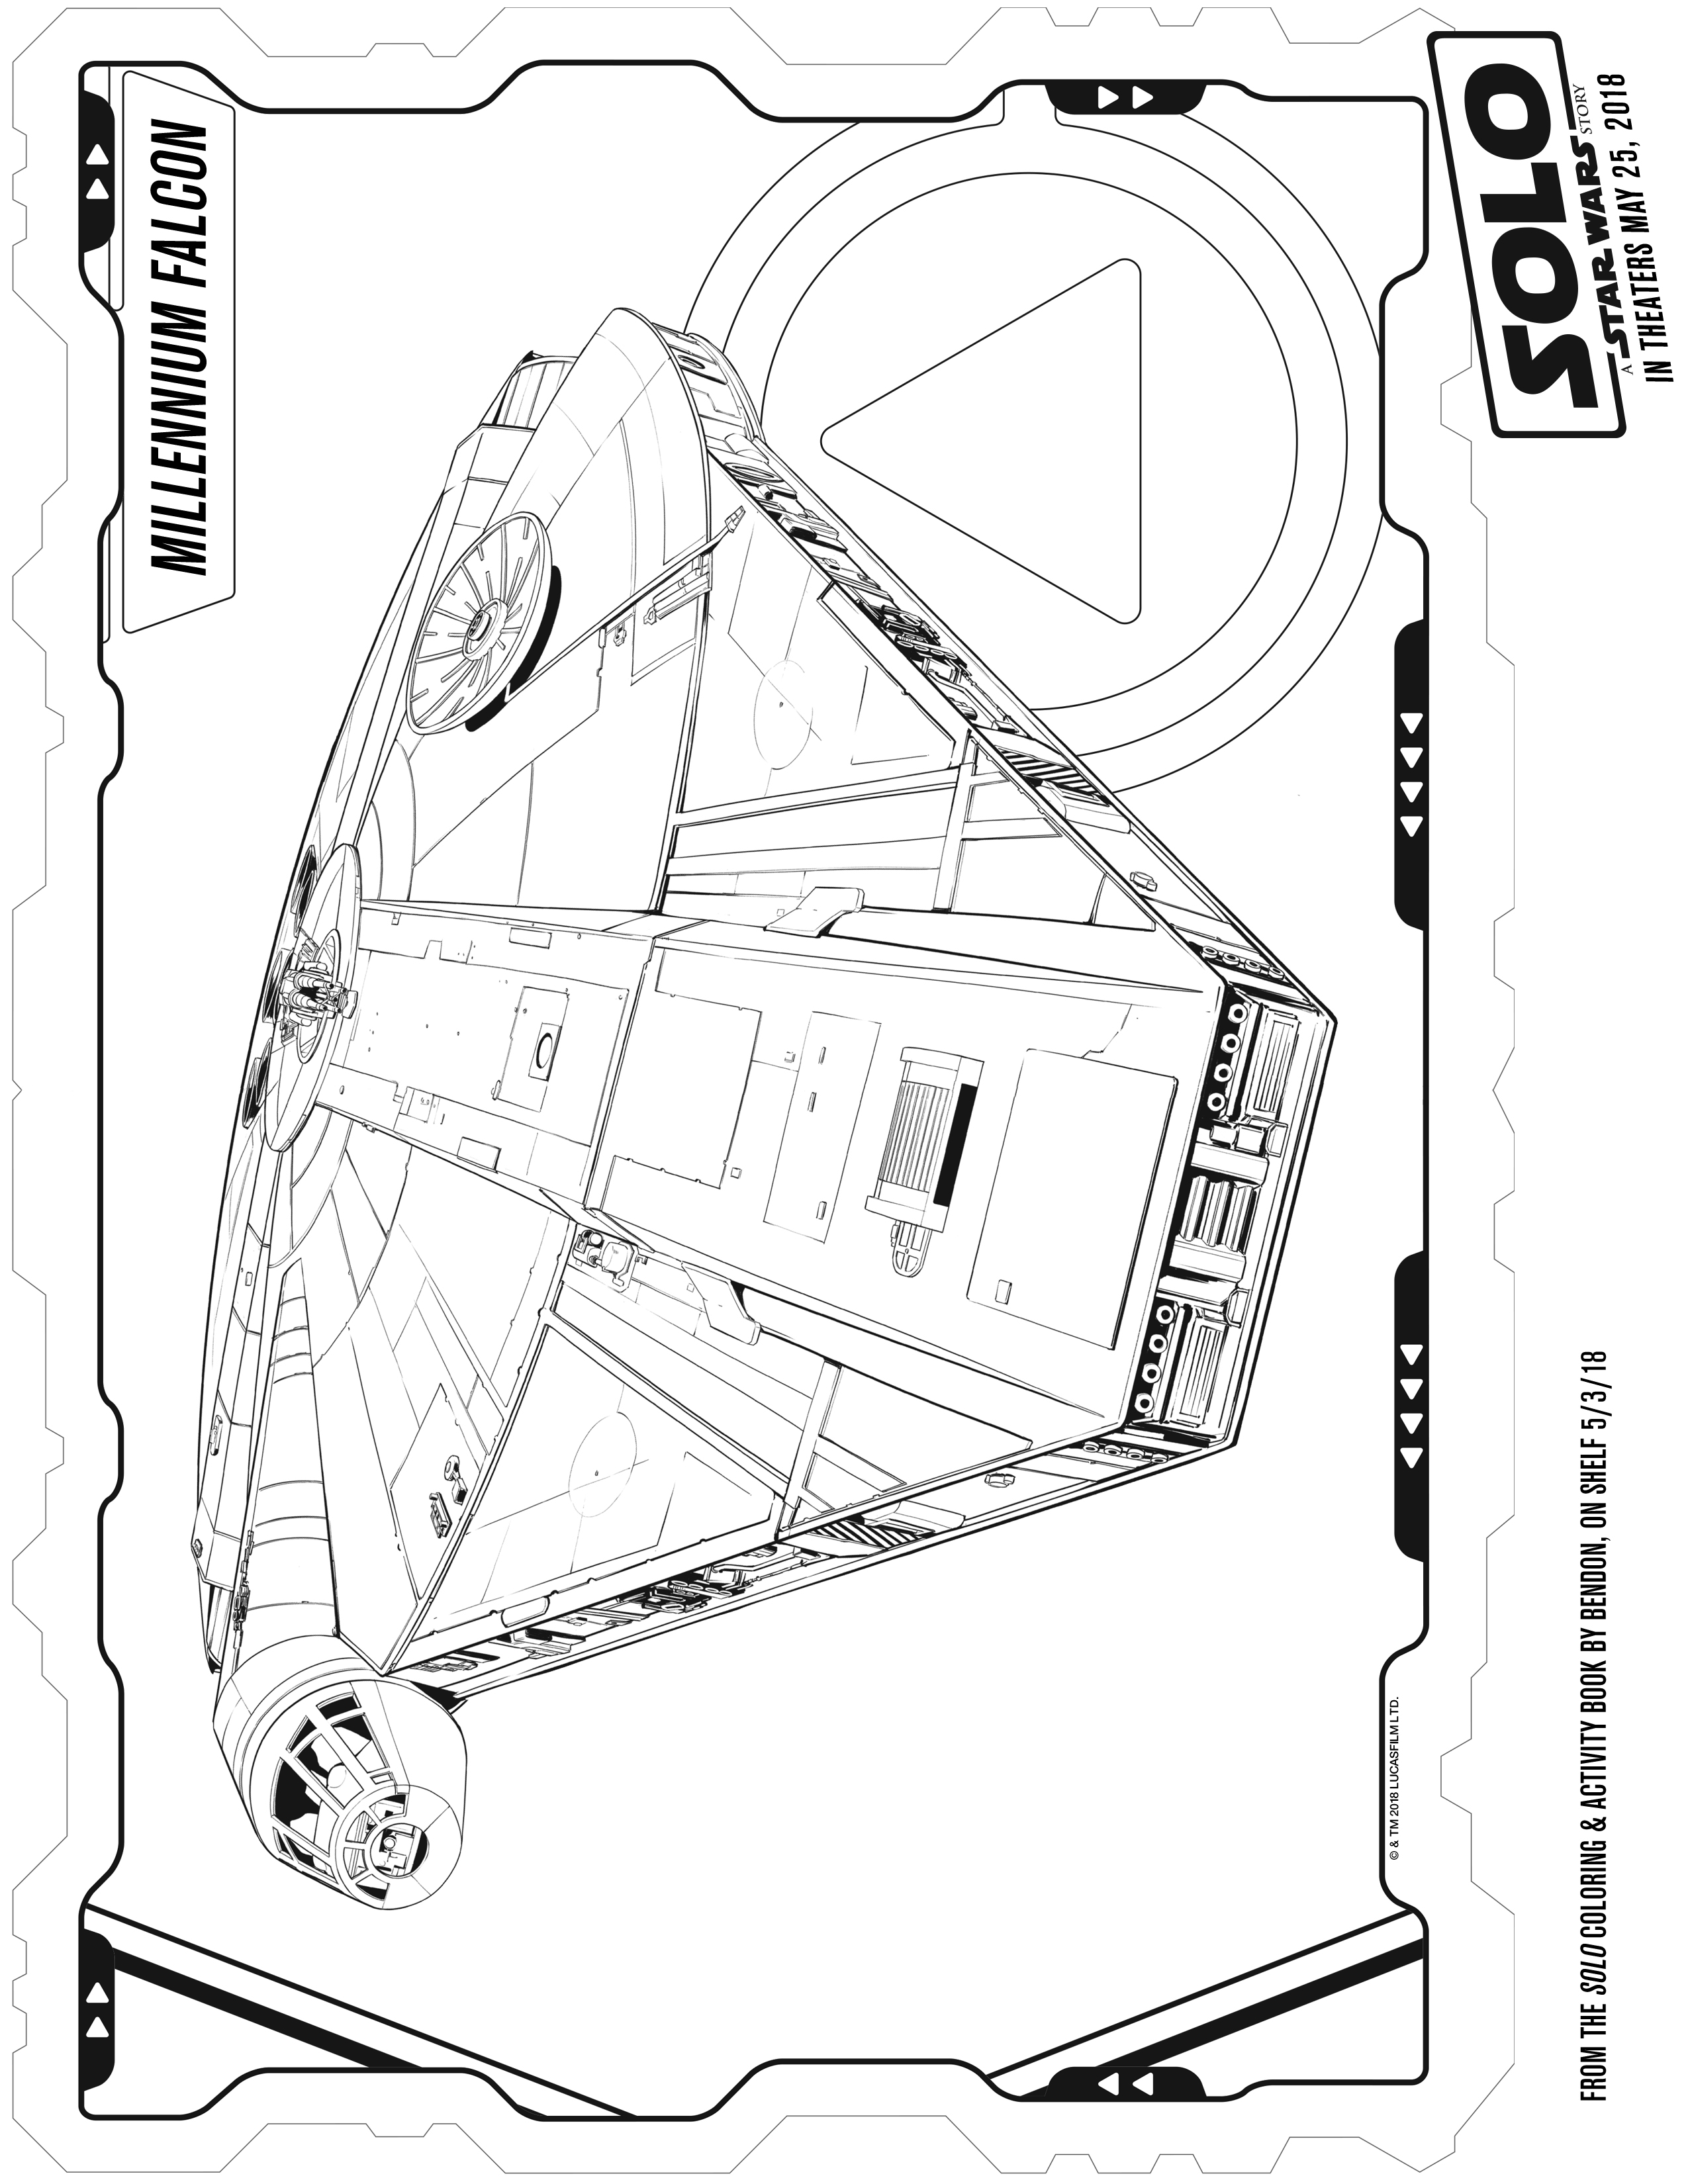 Solo a star wars story coloring pages and activity sheets